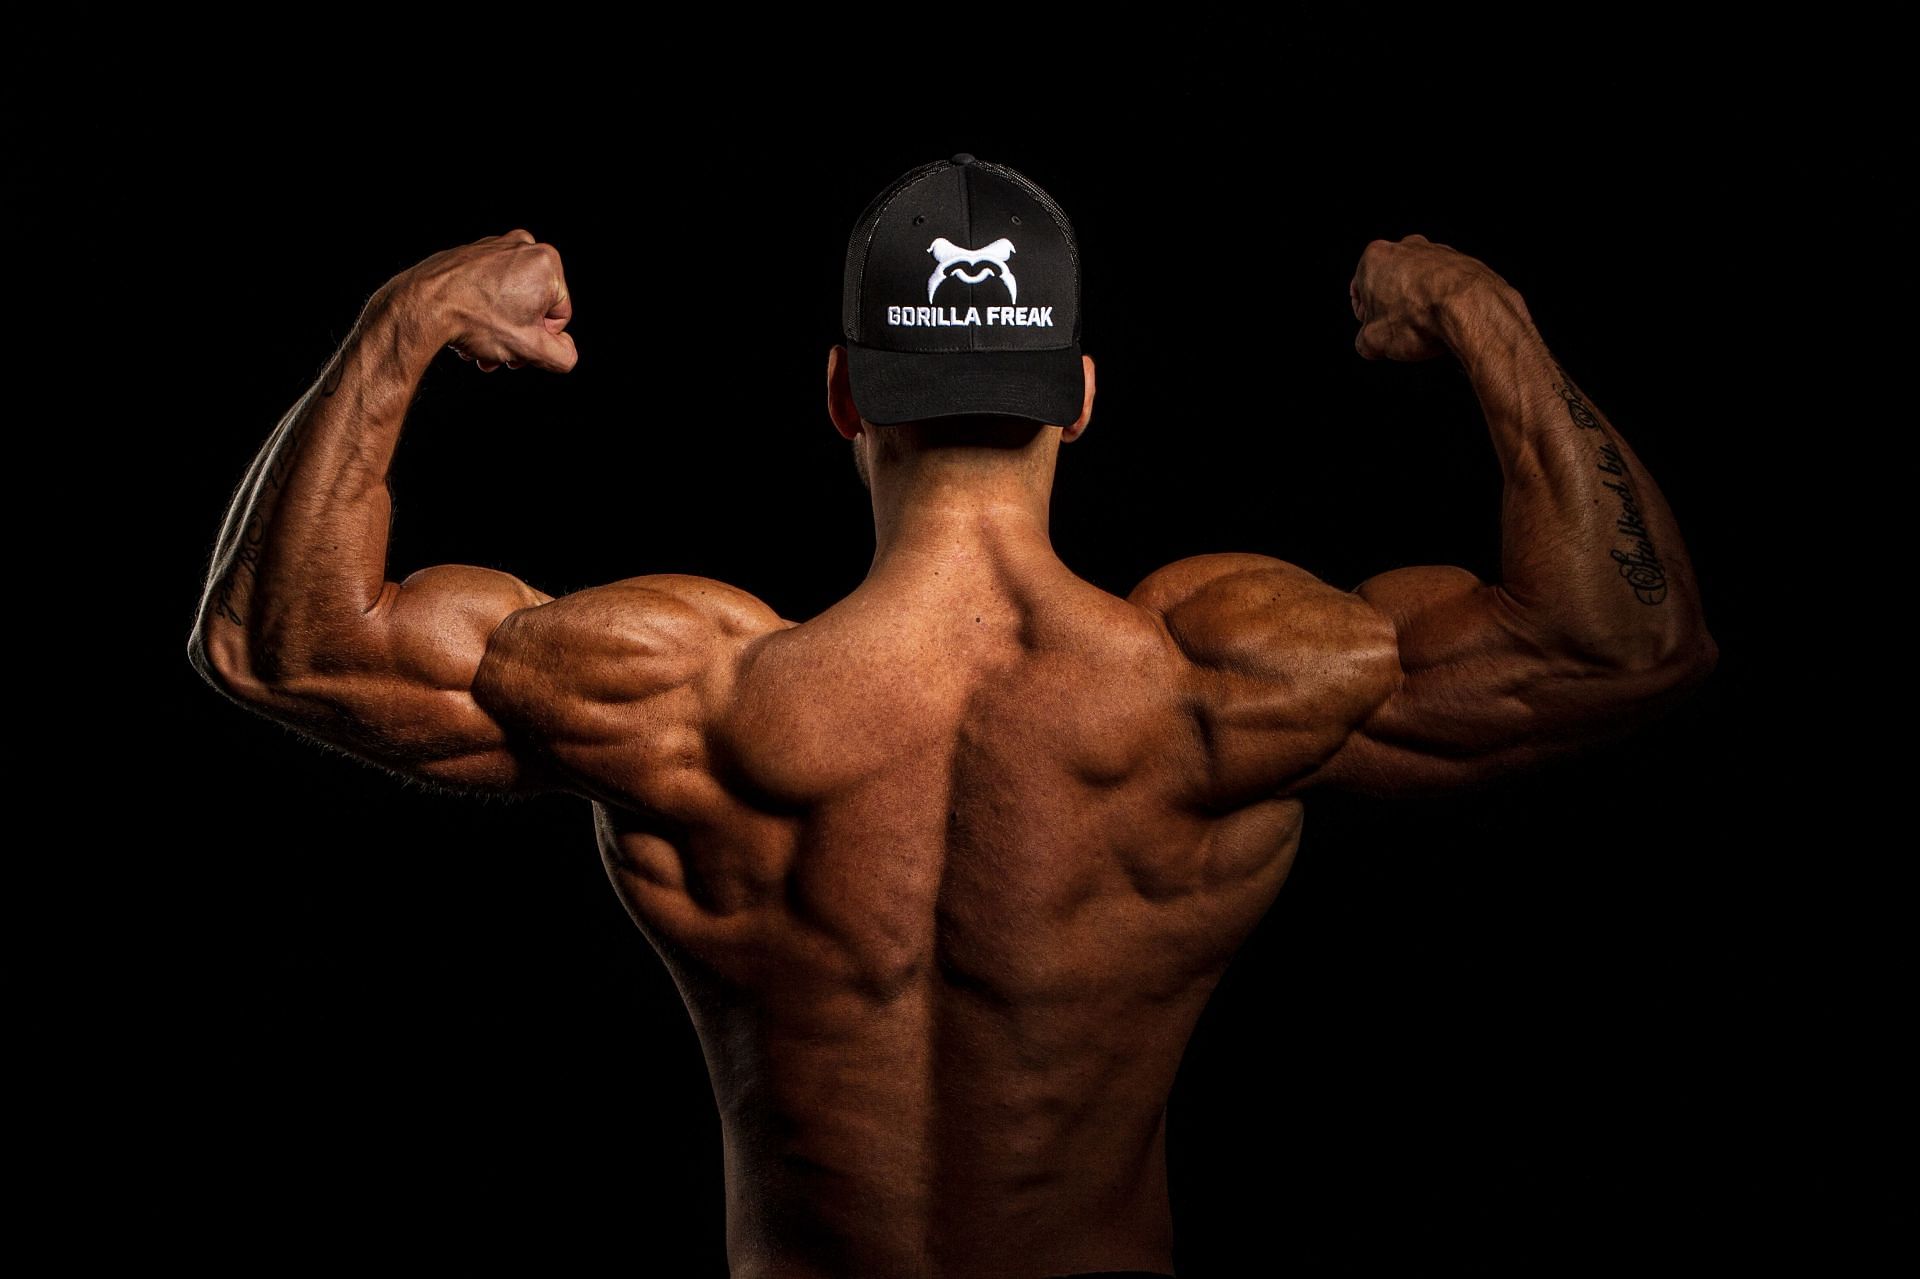 These bodybuilders use anabolic-androgenic steroids (Photo by Gorilla Freak on Unsplash)